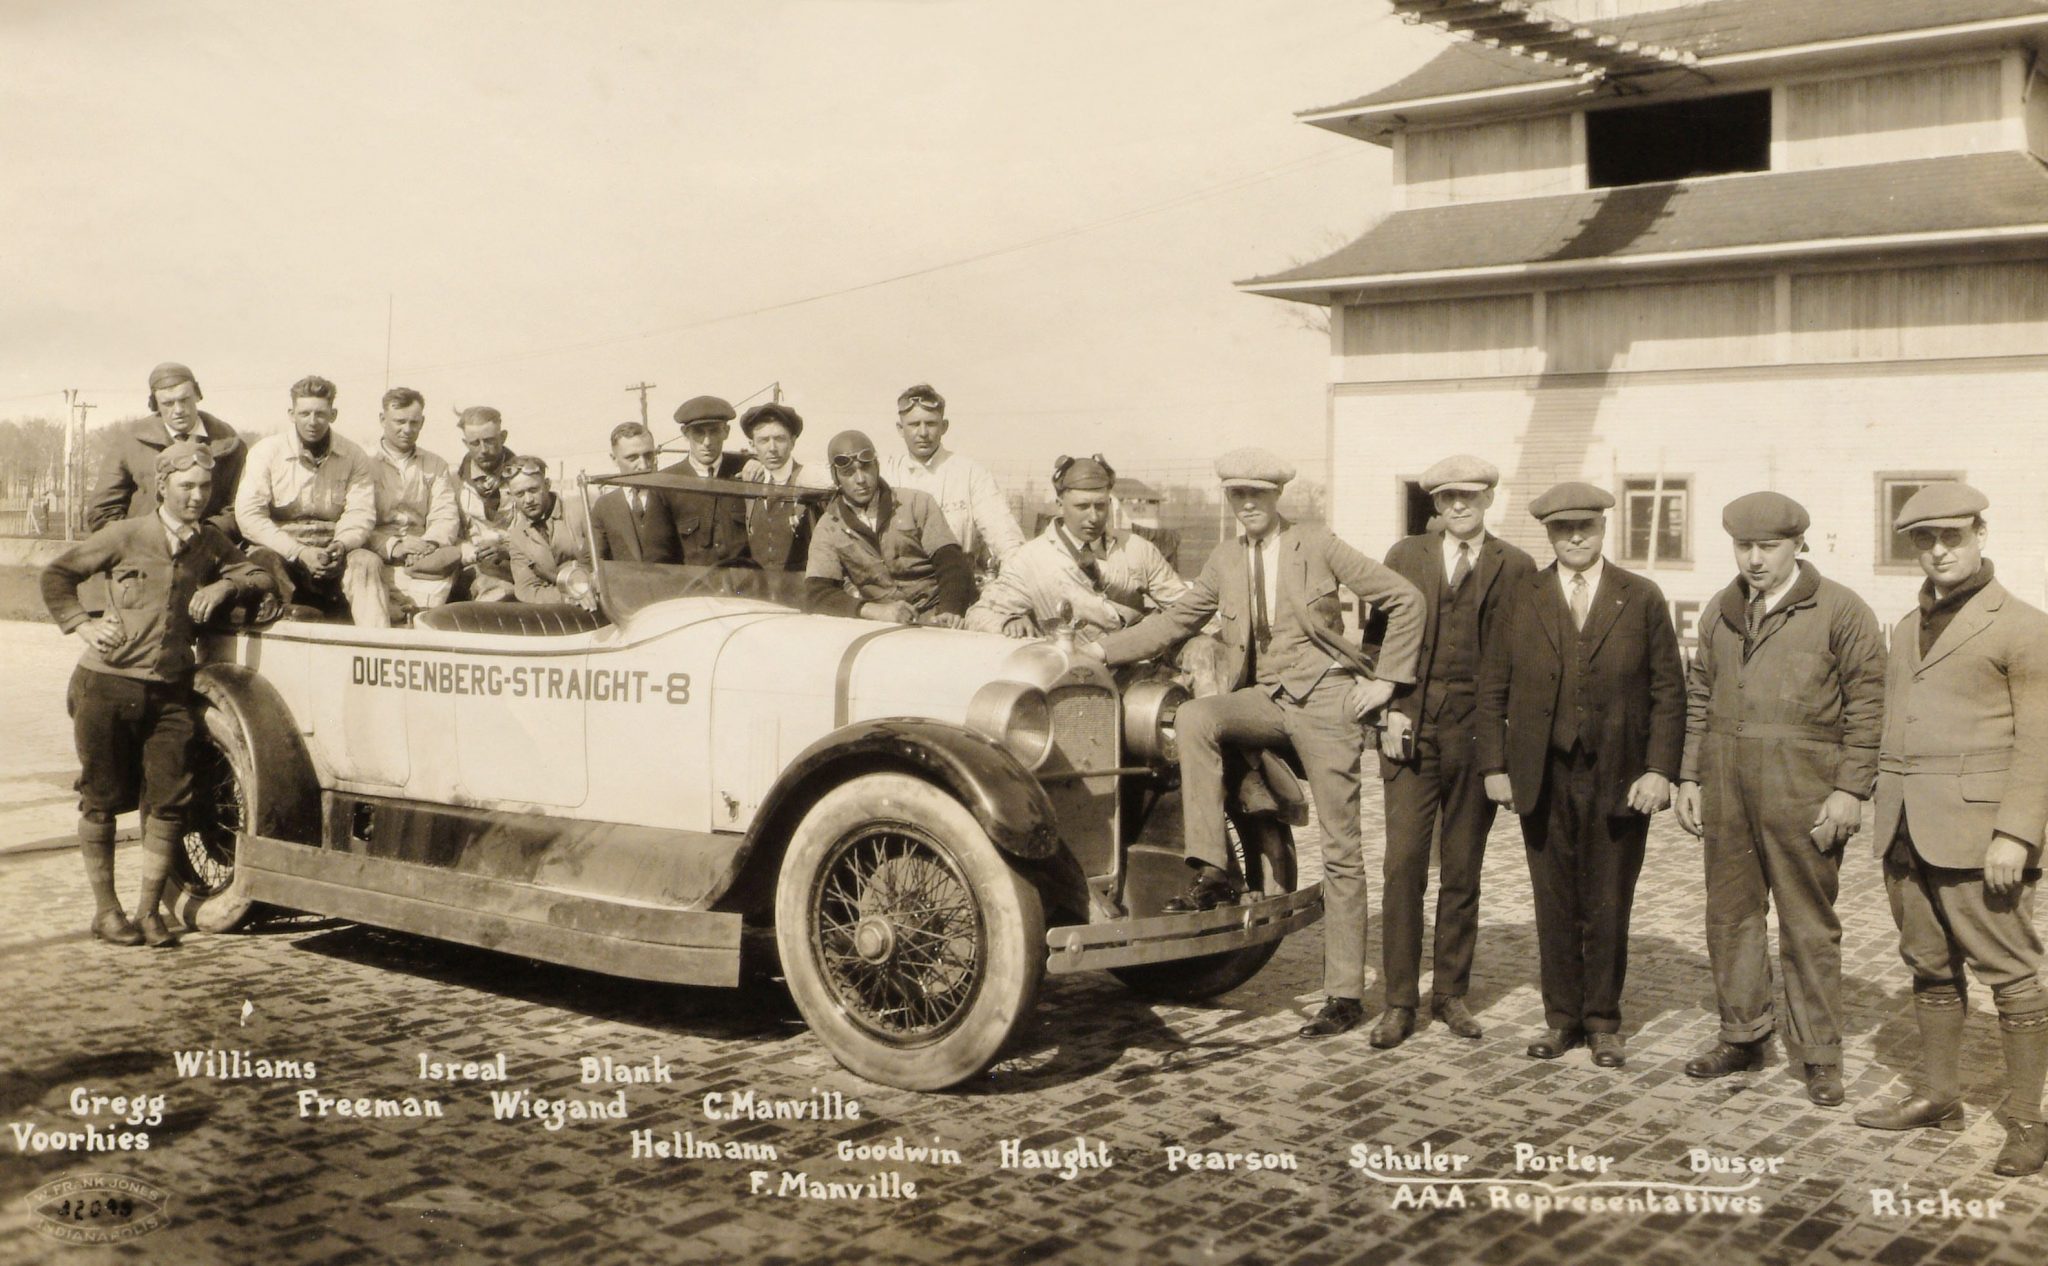 It took a 14-man team and three AAA observers to verify the Duesenberg Model A’s 24-hours record run at Indianapolis in April 1923. The car clocked 3,155 miles in 24 hours for an average speed of 131.45 mph. In total the car accumulated over 18,000 miles during three weeks of endurance tests, and then paced the Indy 500 in May. It was the only instance in the history of the race when the pace car had more accumulated track time than the race cars!